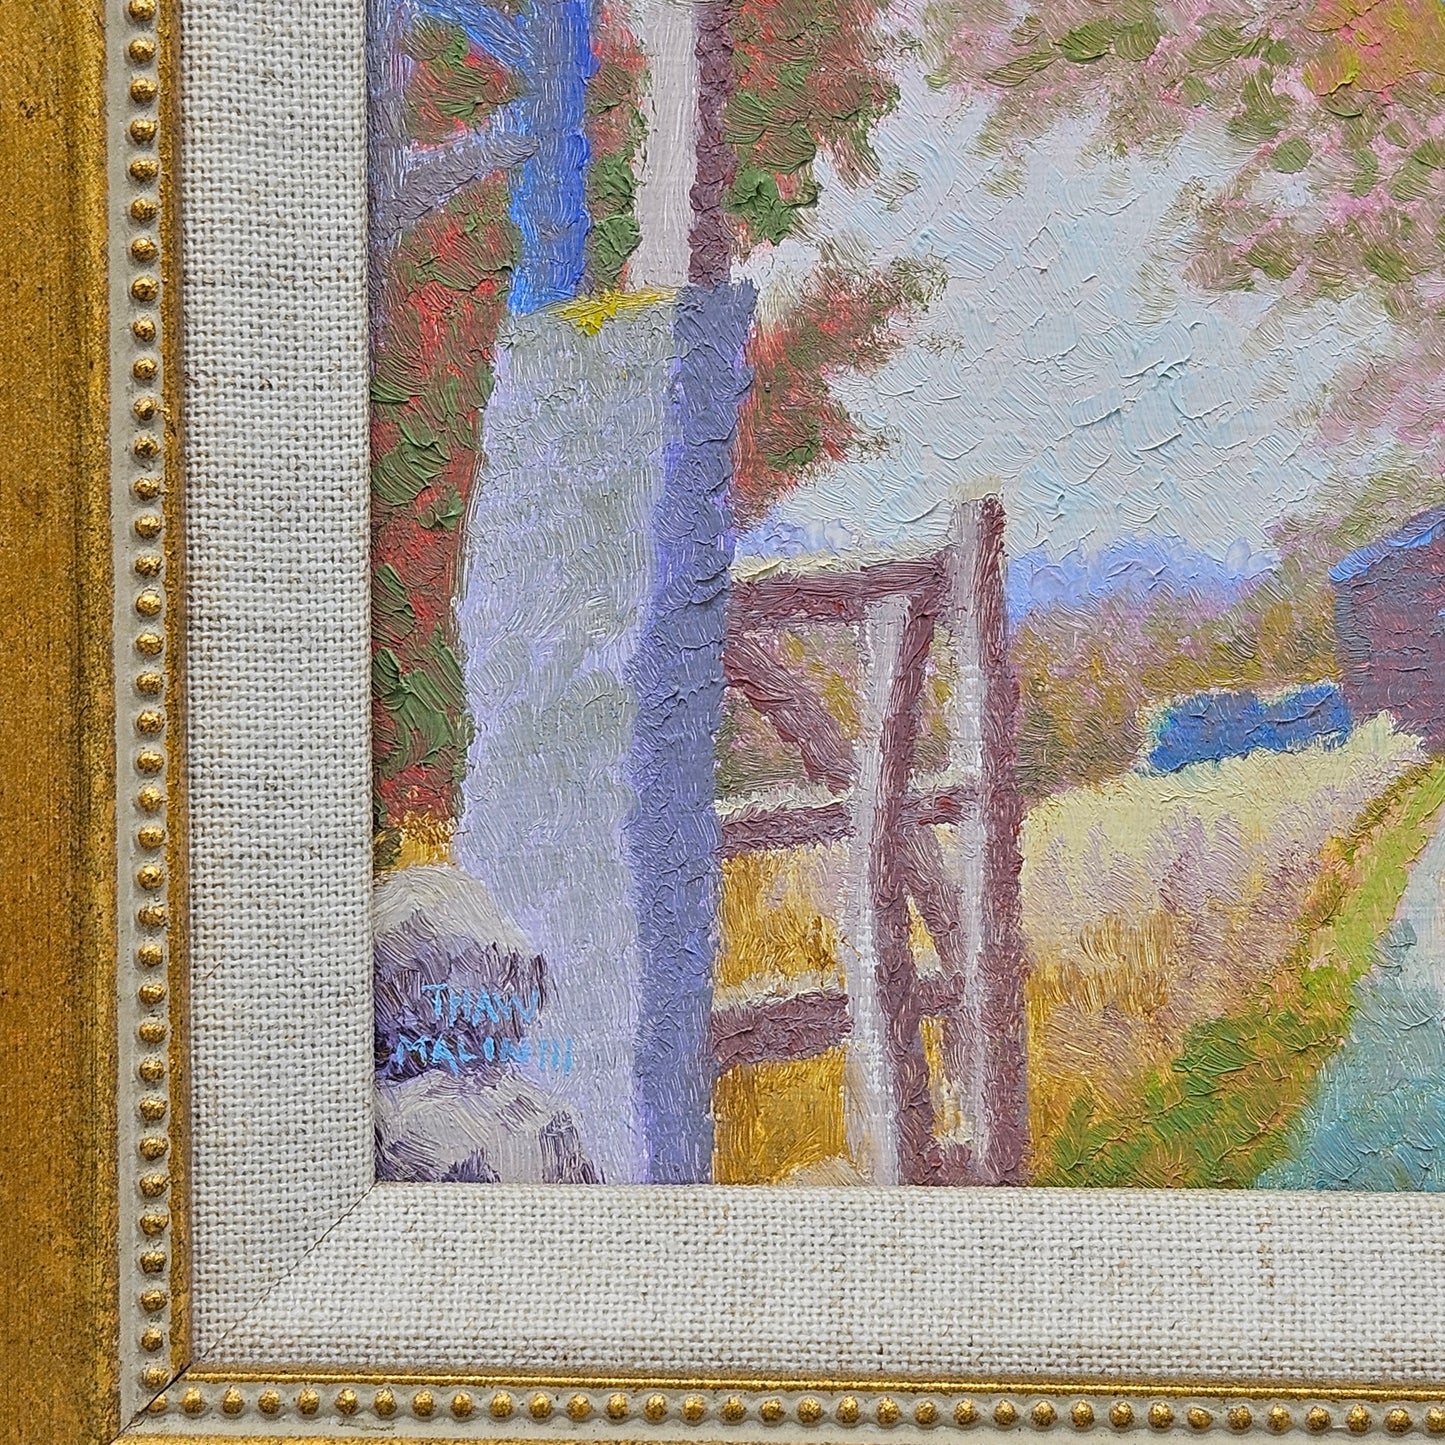 Vintage Signed Oil on Board "Lanes End" by Thaw Malin